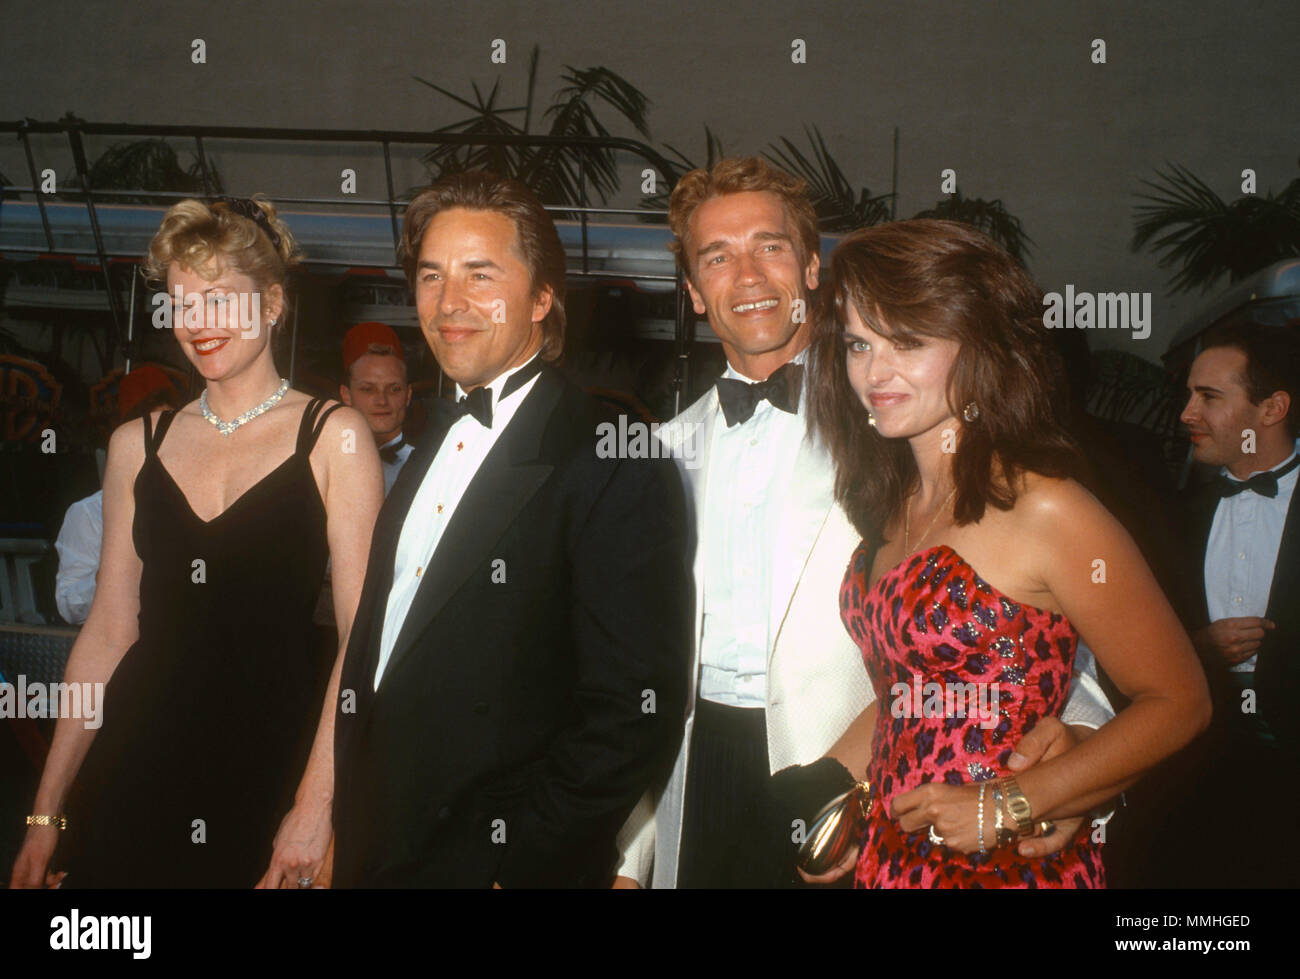 BURBANK, CA - JUNE 02: (L-R) Actress Melanie Griffith, actor Don Johnson, actor Arnold Schwarzenegger and Maria Shriver attend Warner Bros. Studio Rededication event at Warner Bros. Studios on June 2, 1990 in Burbank, California. Photo by Barry King/Alamy Stock Photo Stock Photo